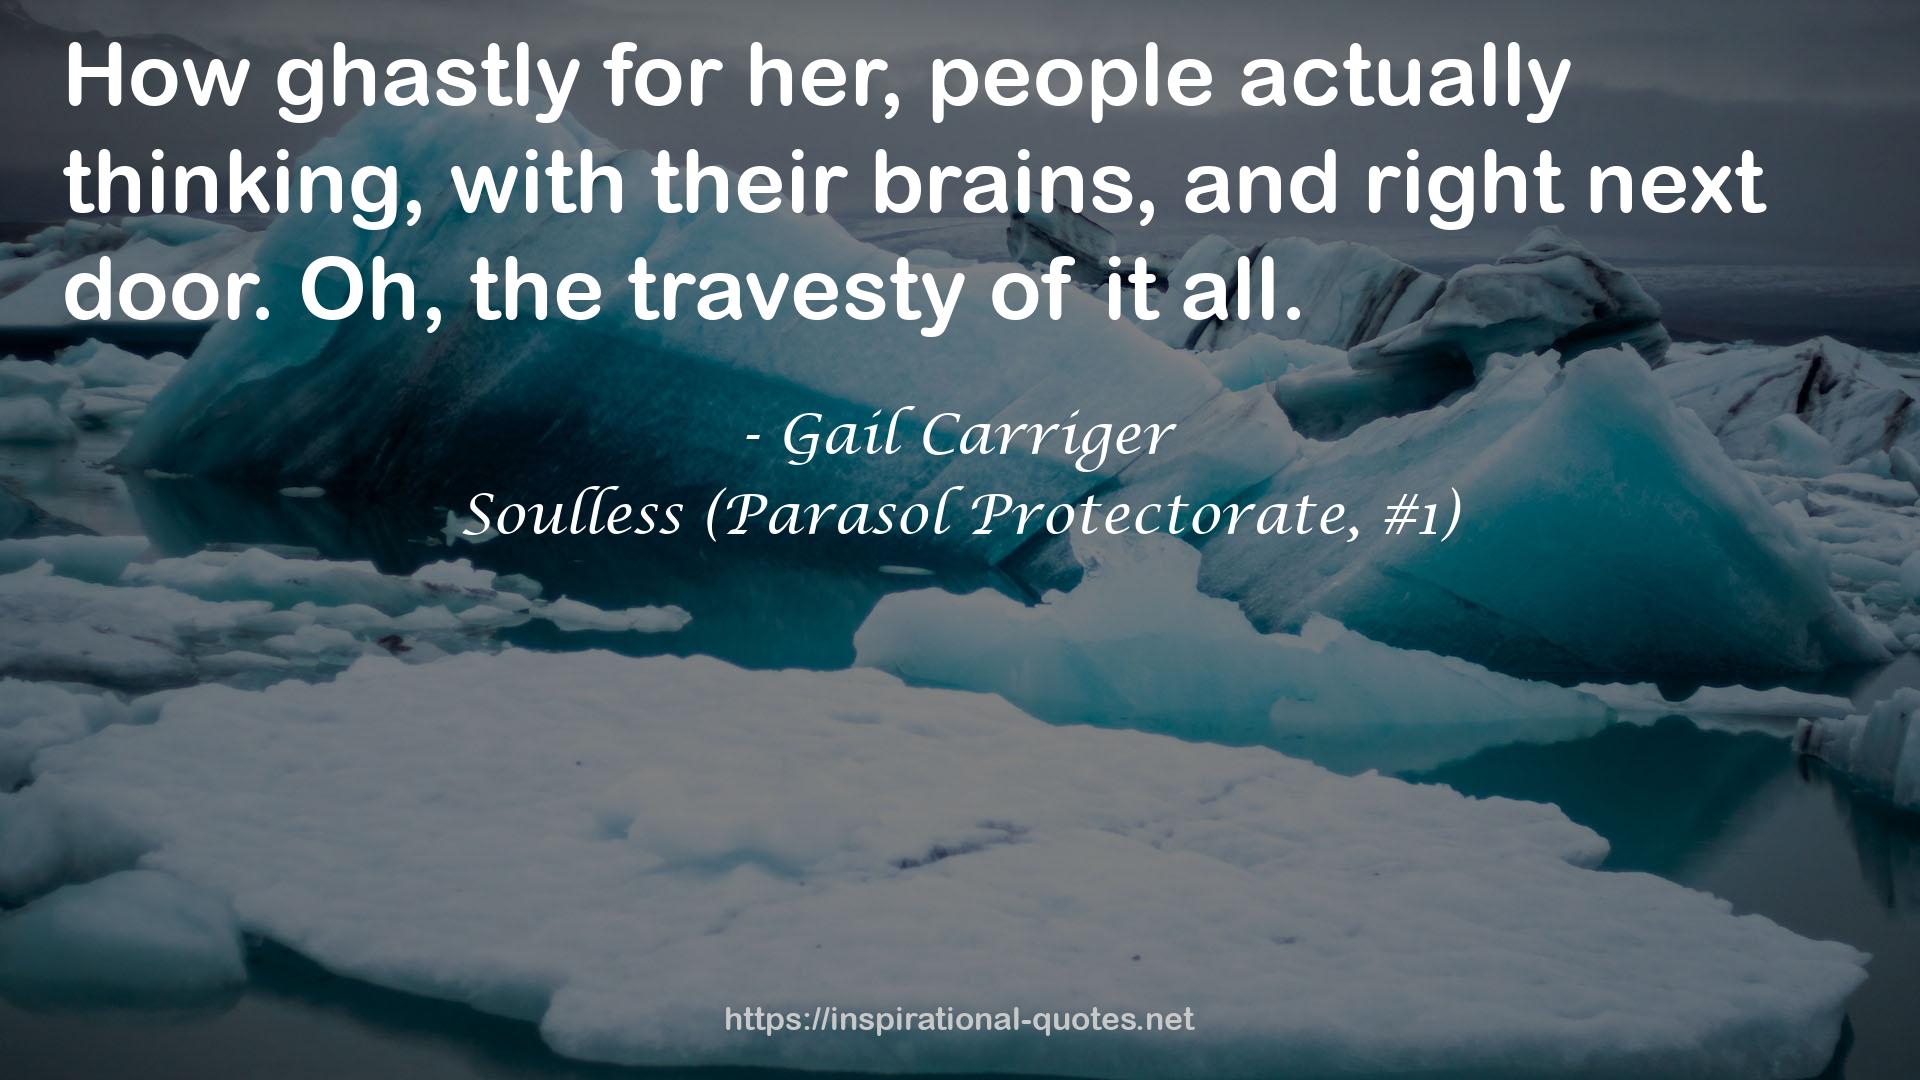 Gail Carriger QUOTES